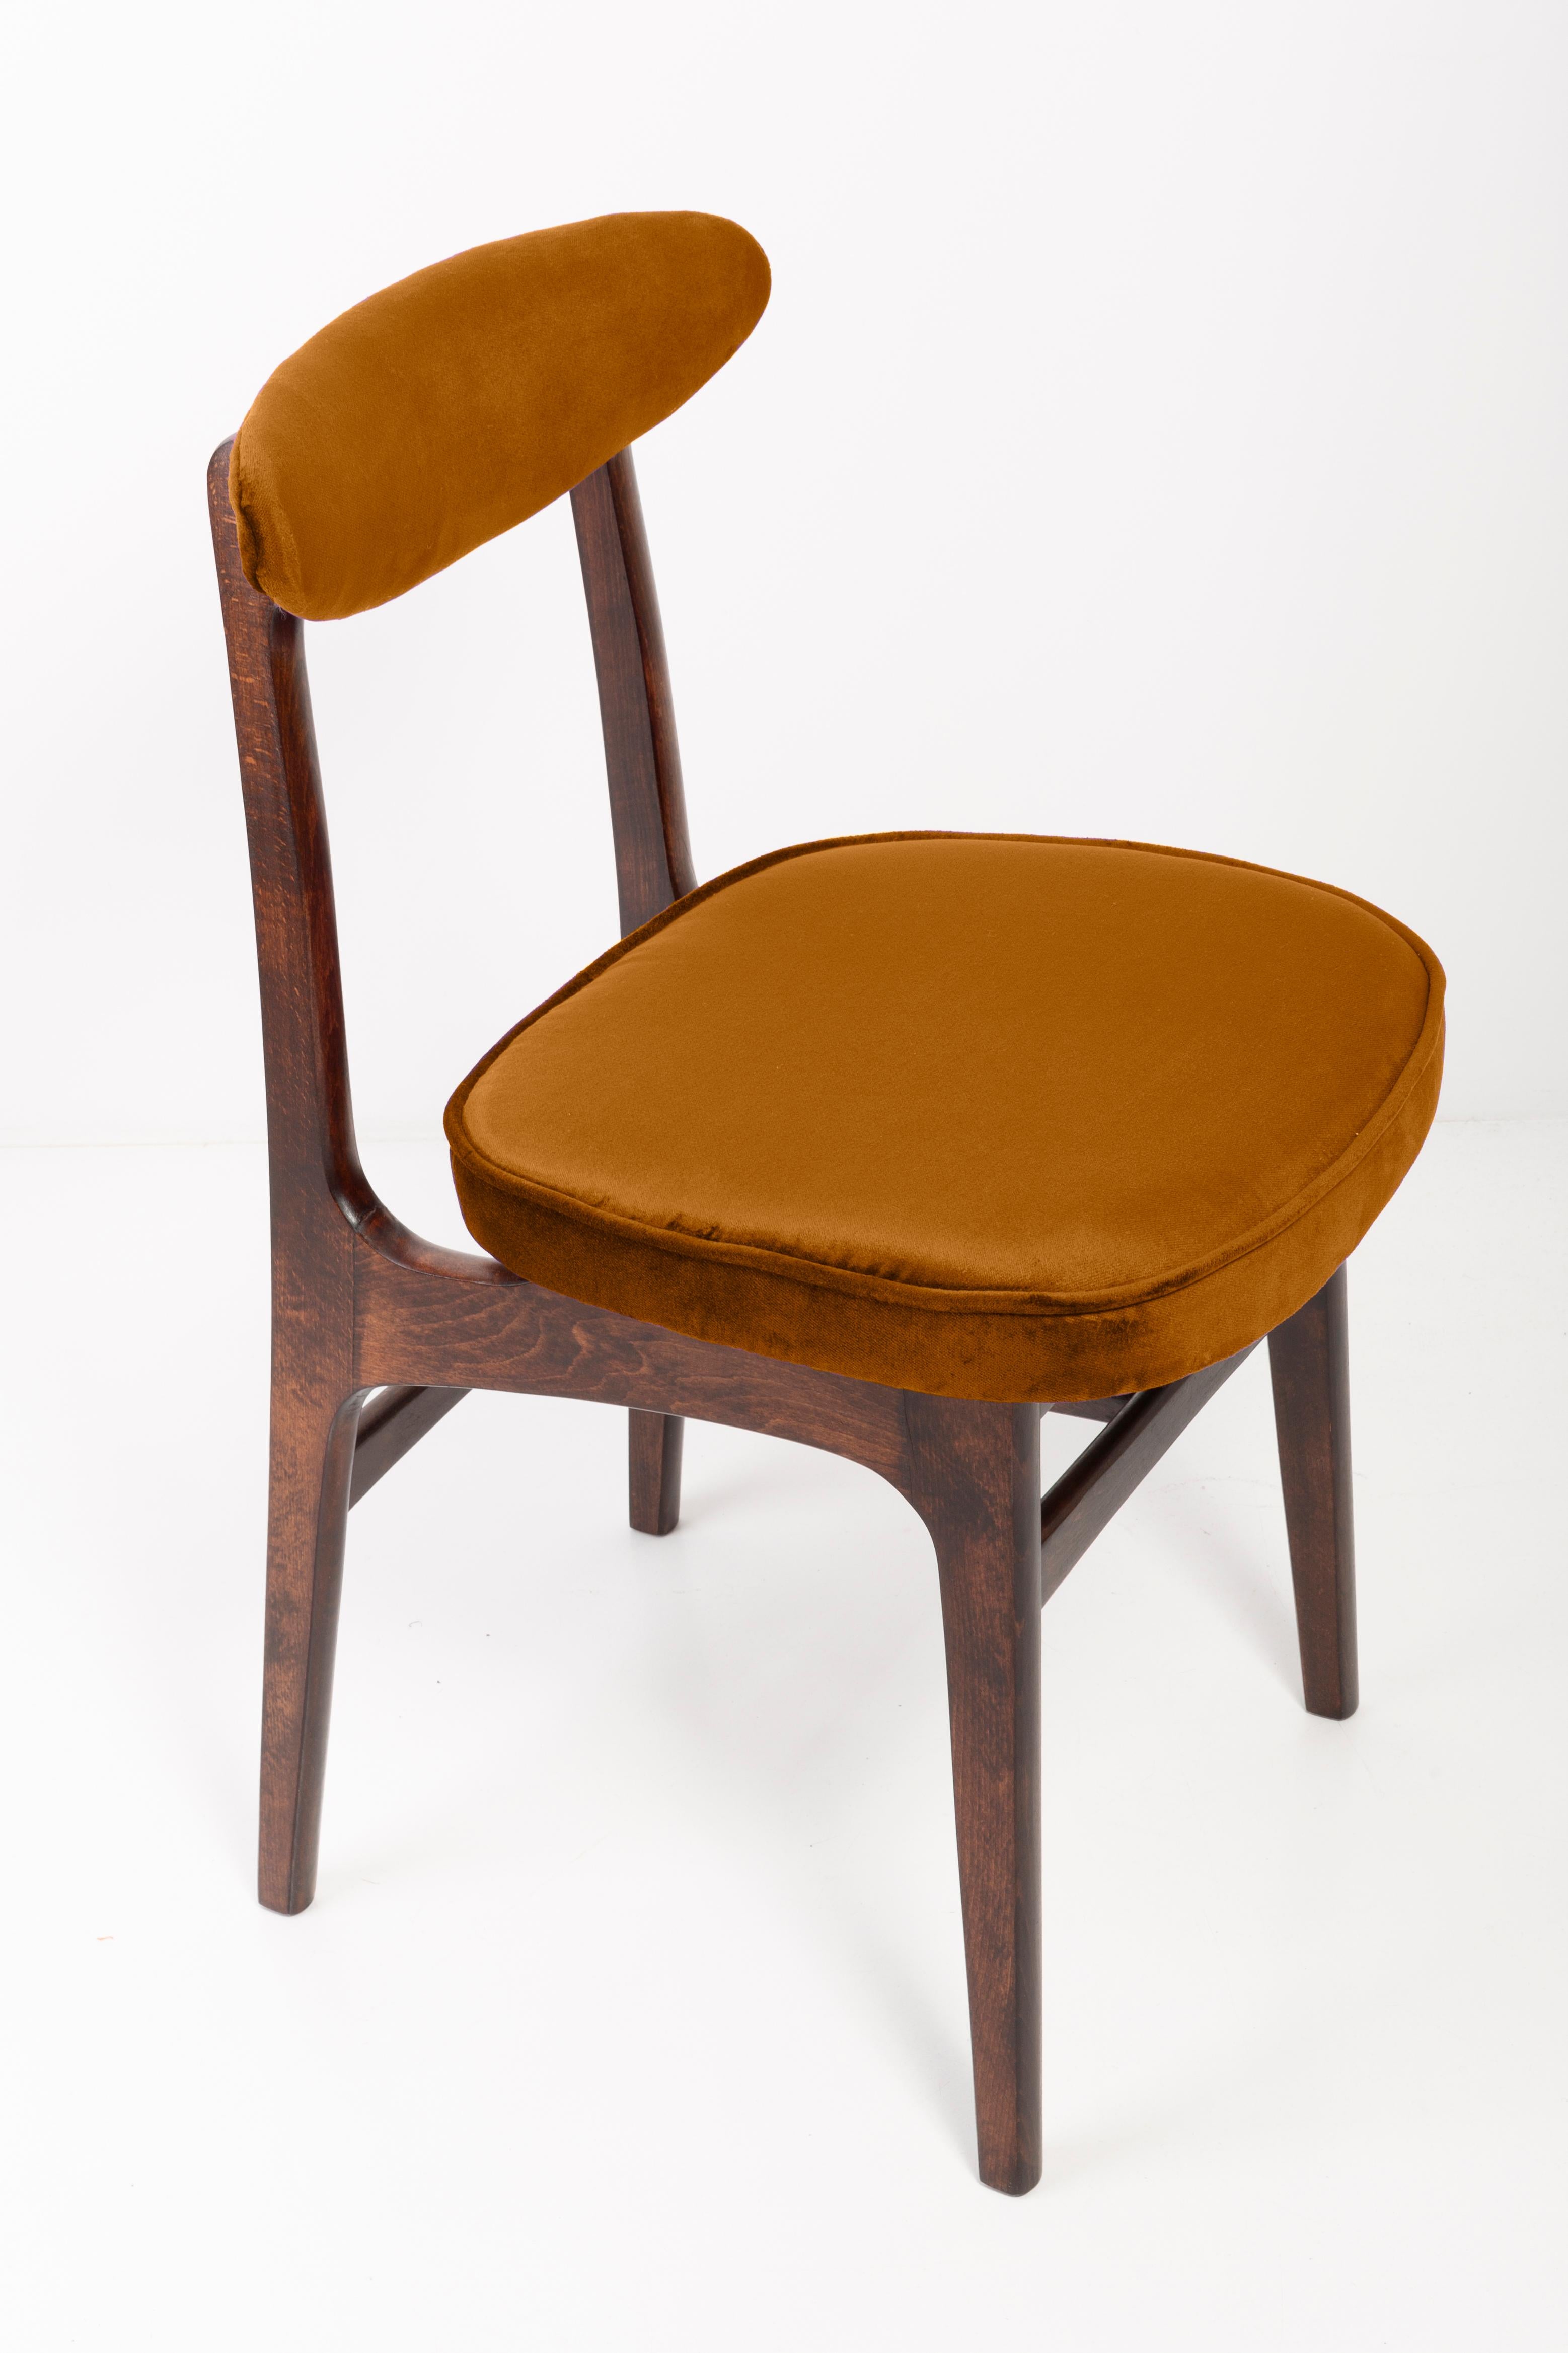 Six chairs designed by Prof. Rajmund Halas. It has been made of beechwood. Chairs are after undergone a complete upholstery renovation, the woodwork has been refreshed. Seats and backs were dressed in a copper (color 960), durable and pleasant to